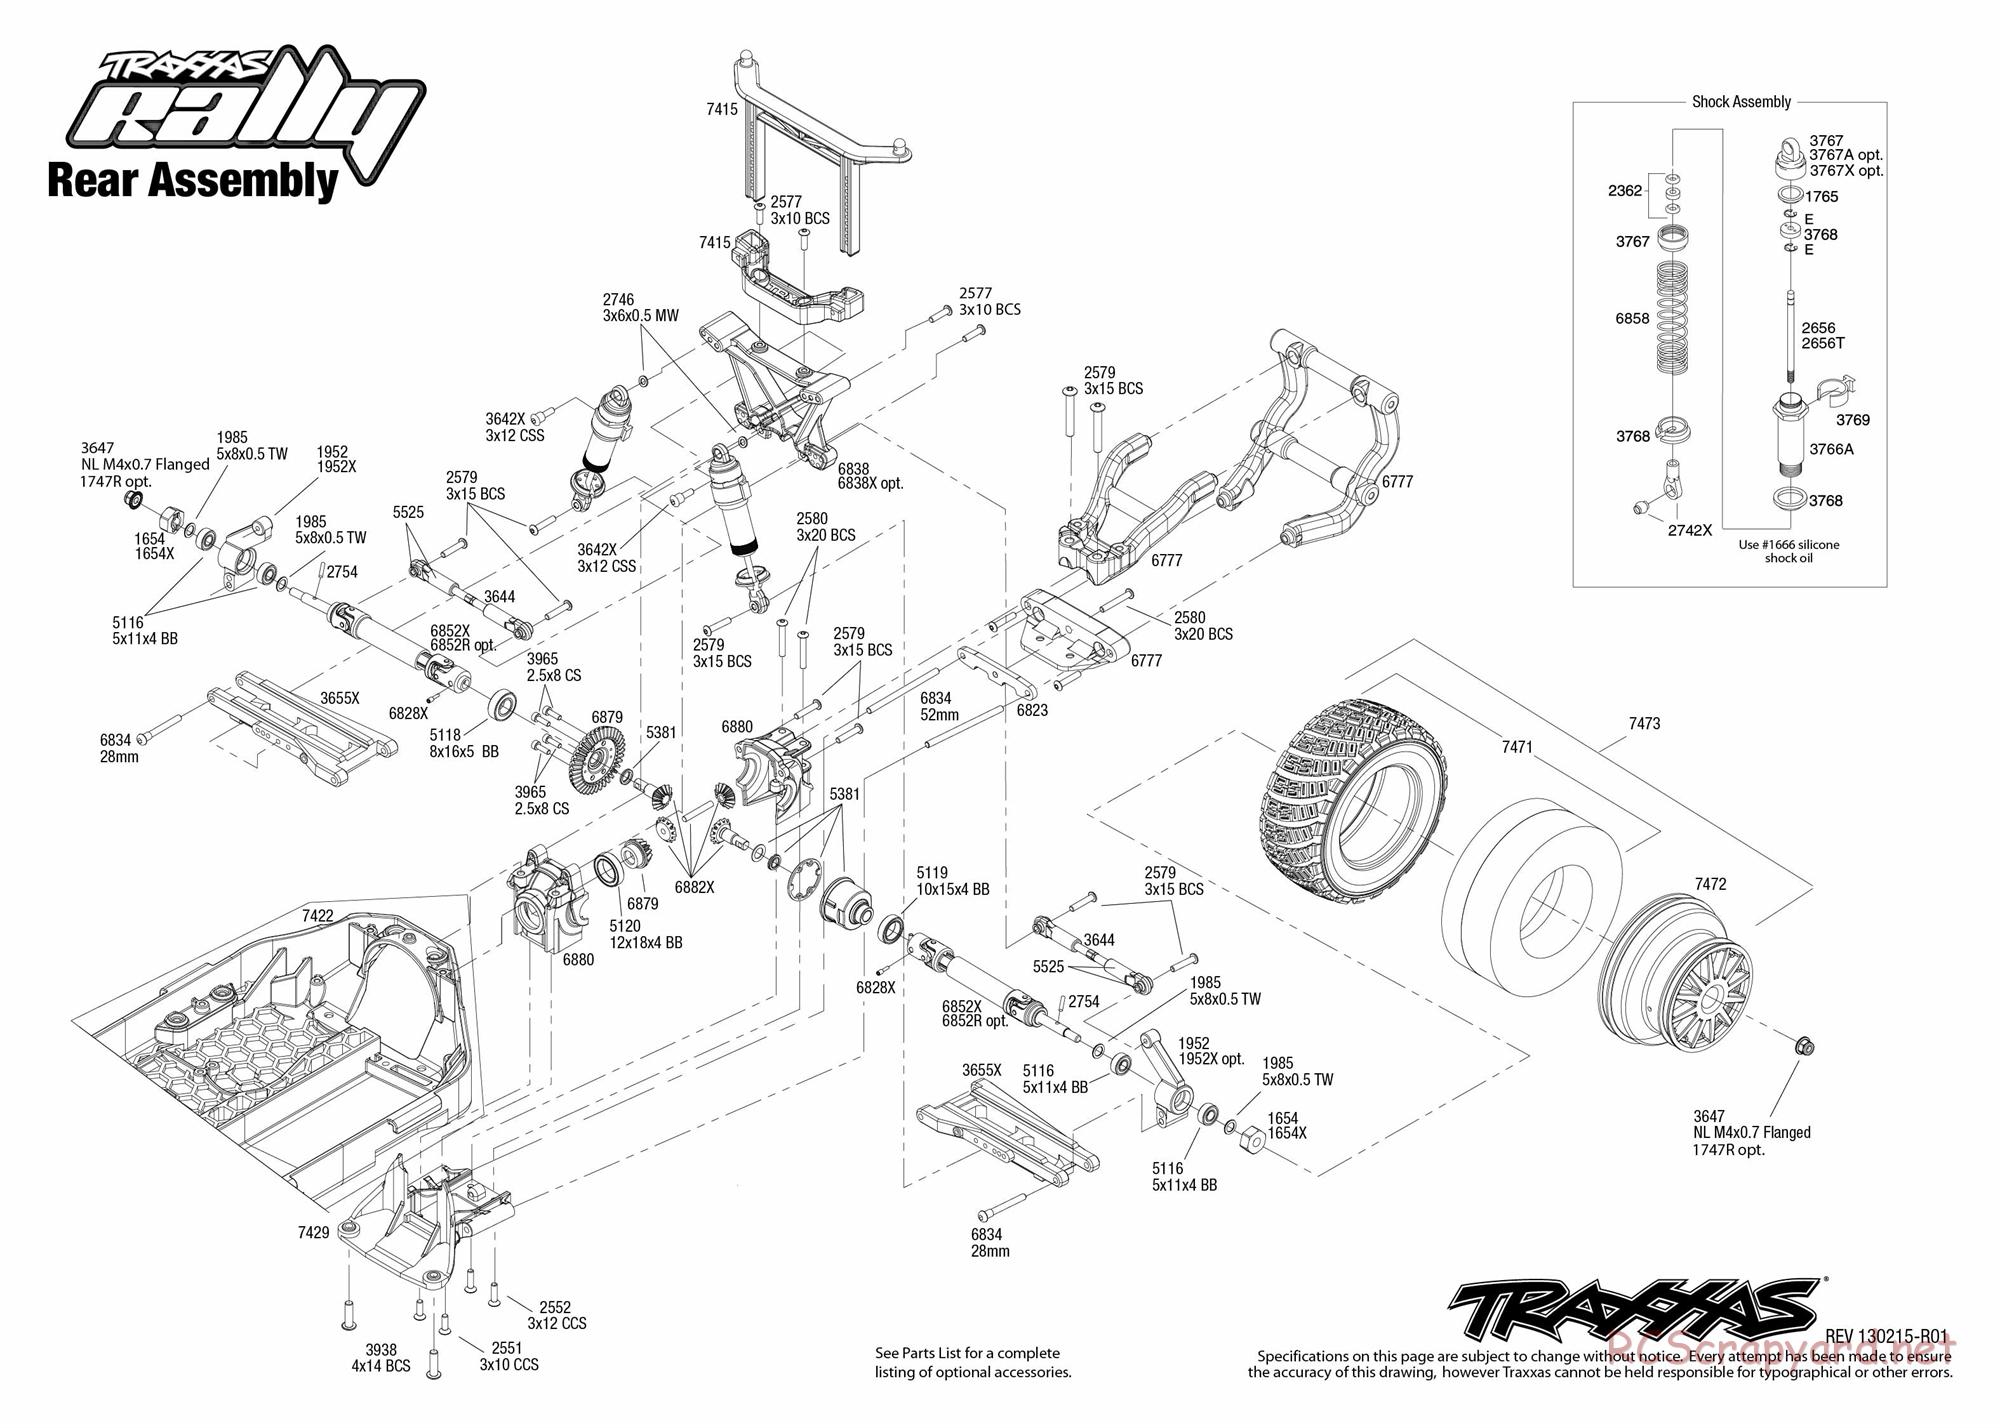 Traxxas - Rally (2012) - Exploded Views - Page 4